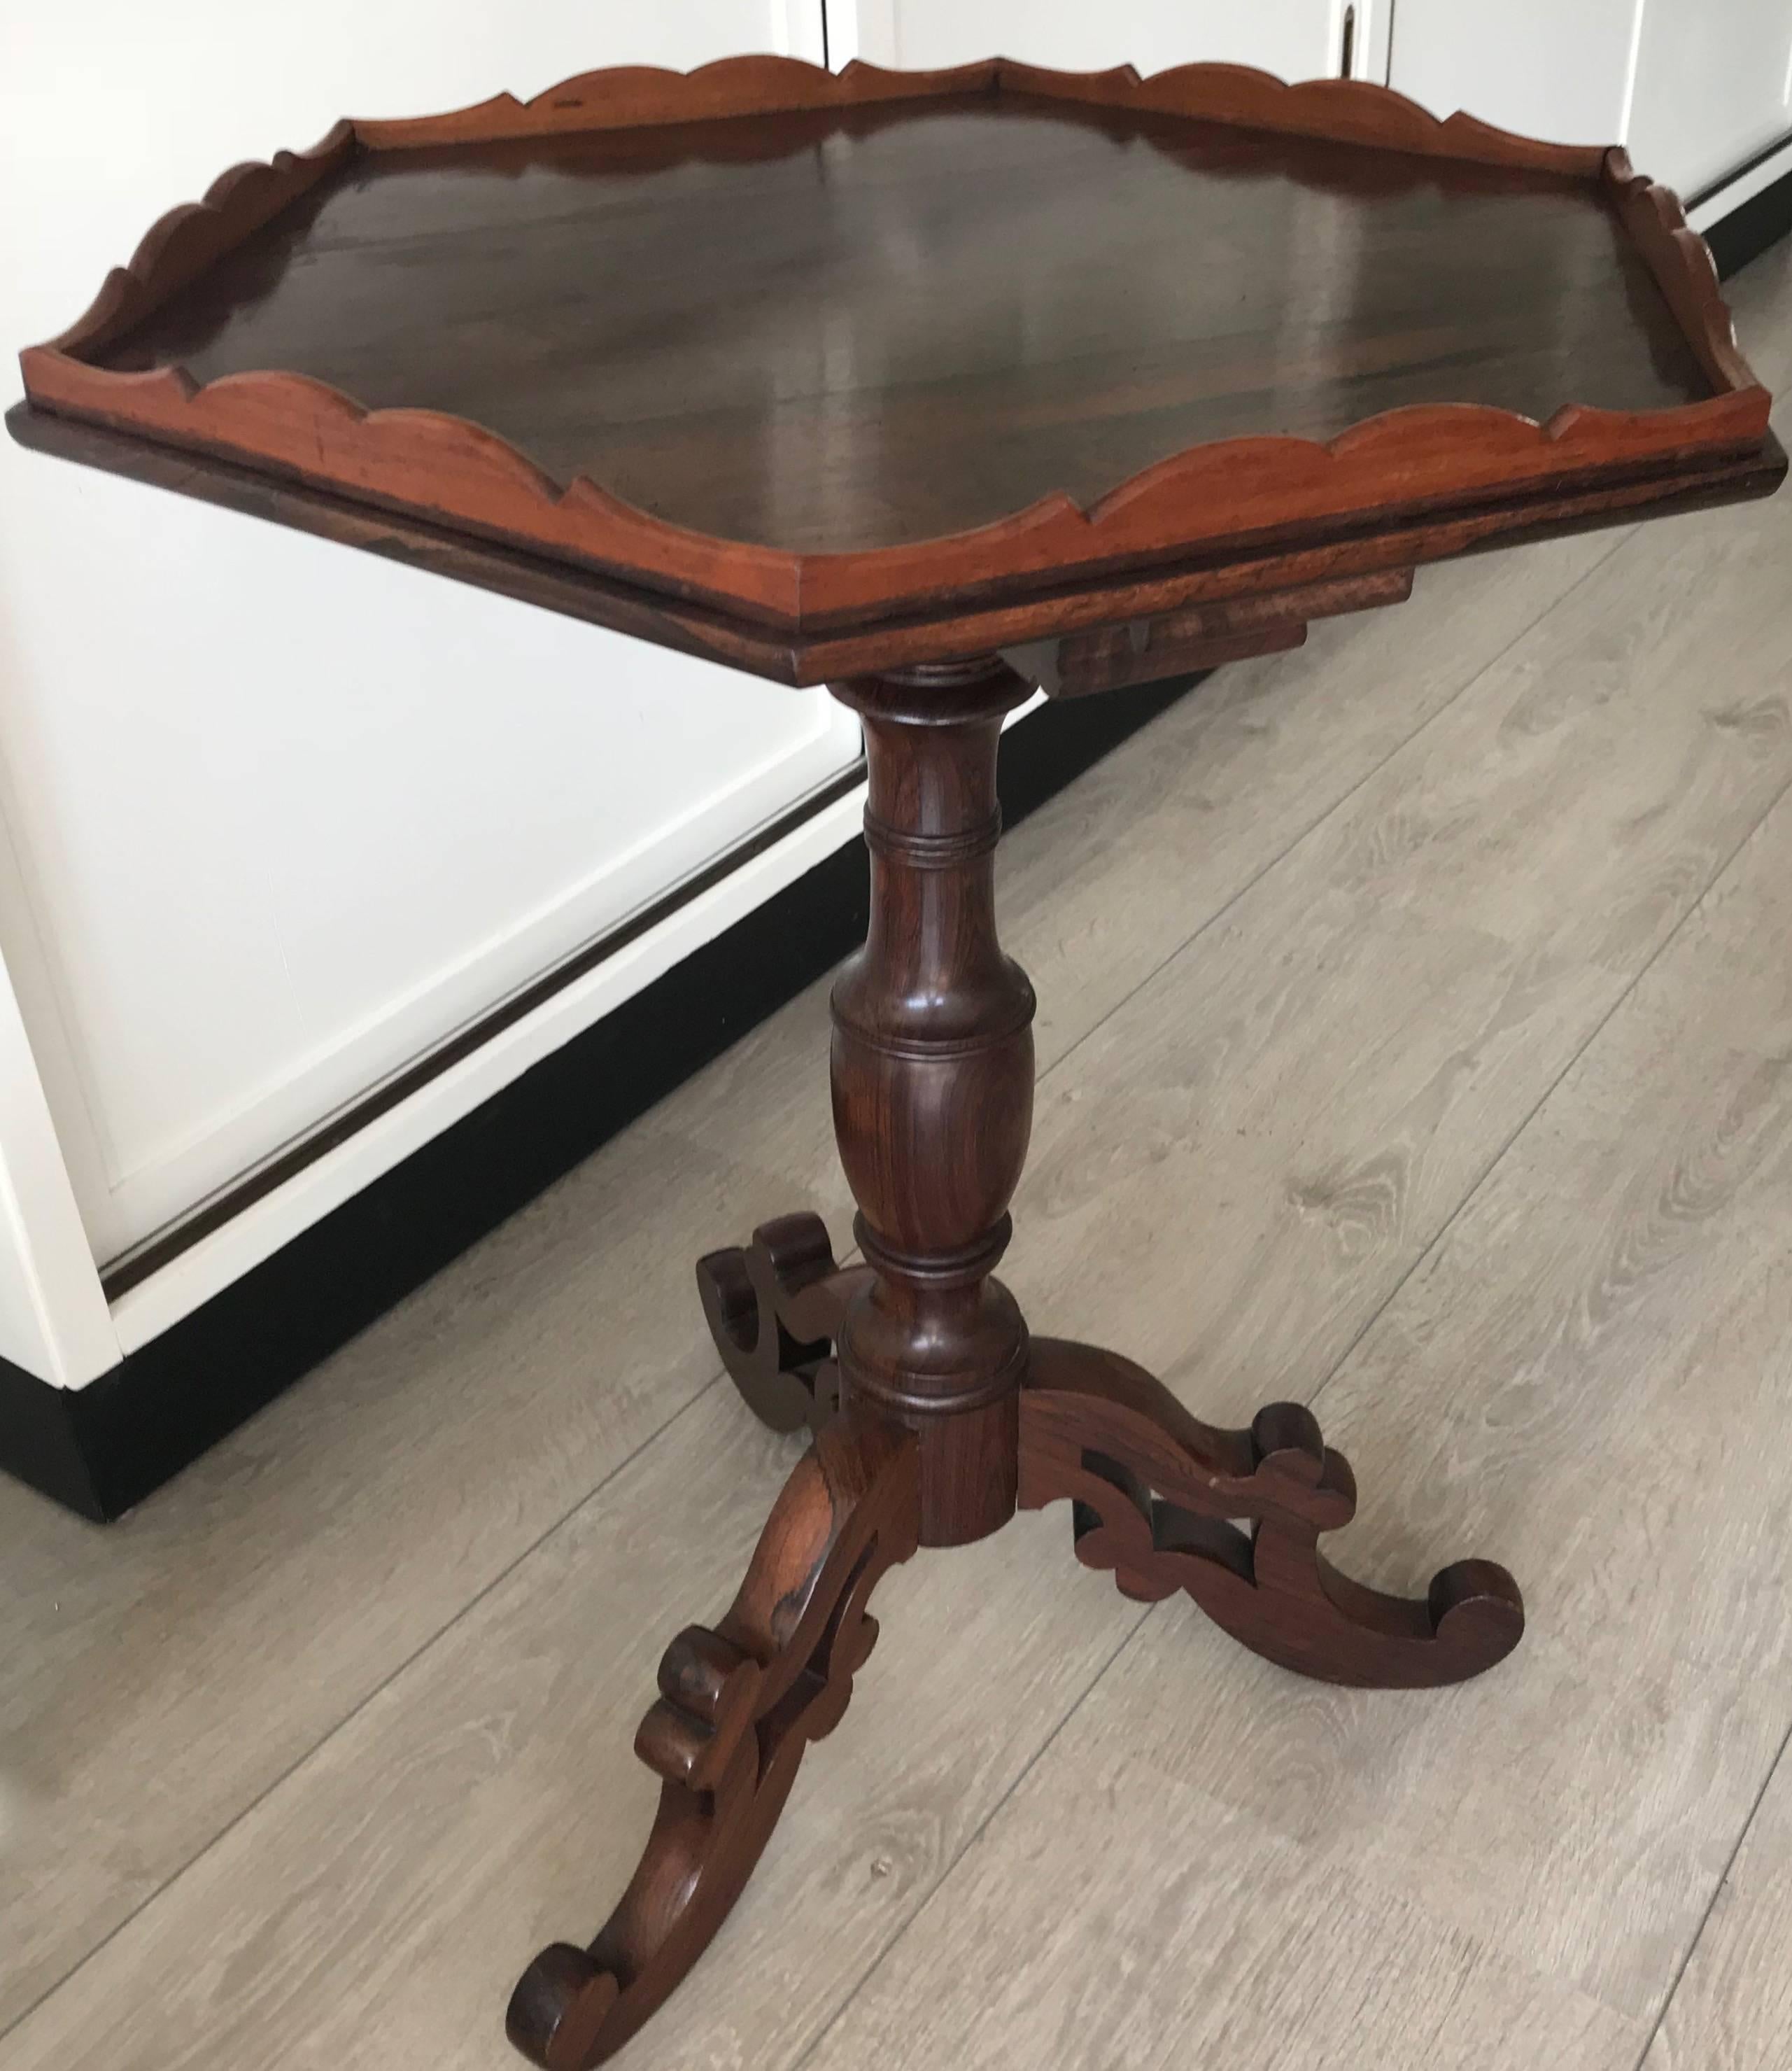 Fine quality, geometrical design, late 19th century table.

This beautiful quality hardwood table of colonial origin comes with a stunning grain in the solid wooden table top. This marvellous and all handcrafted table top sits on a beautifully